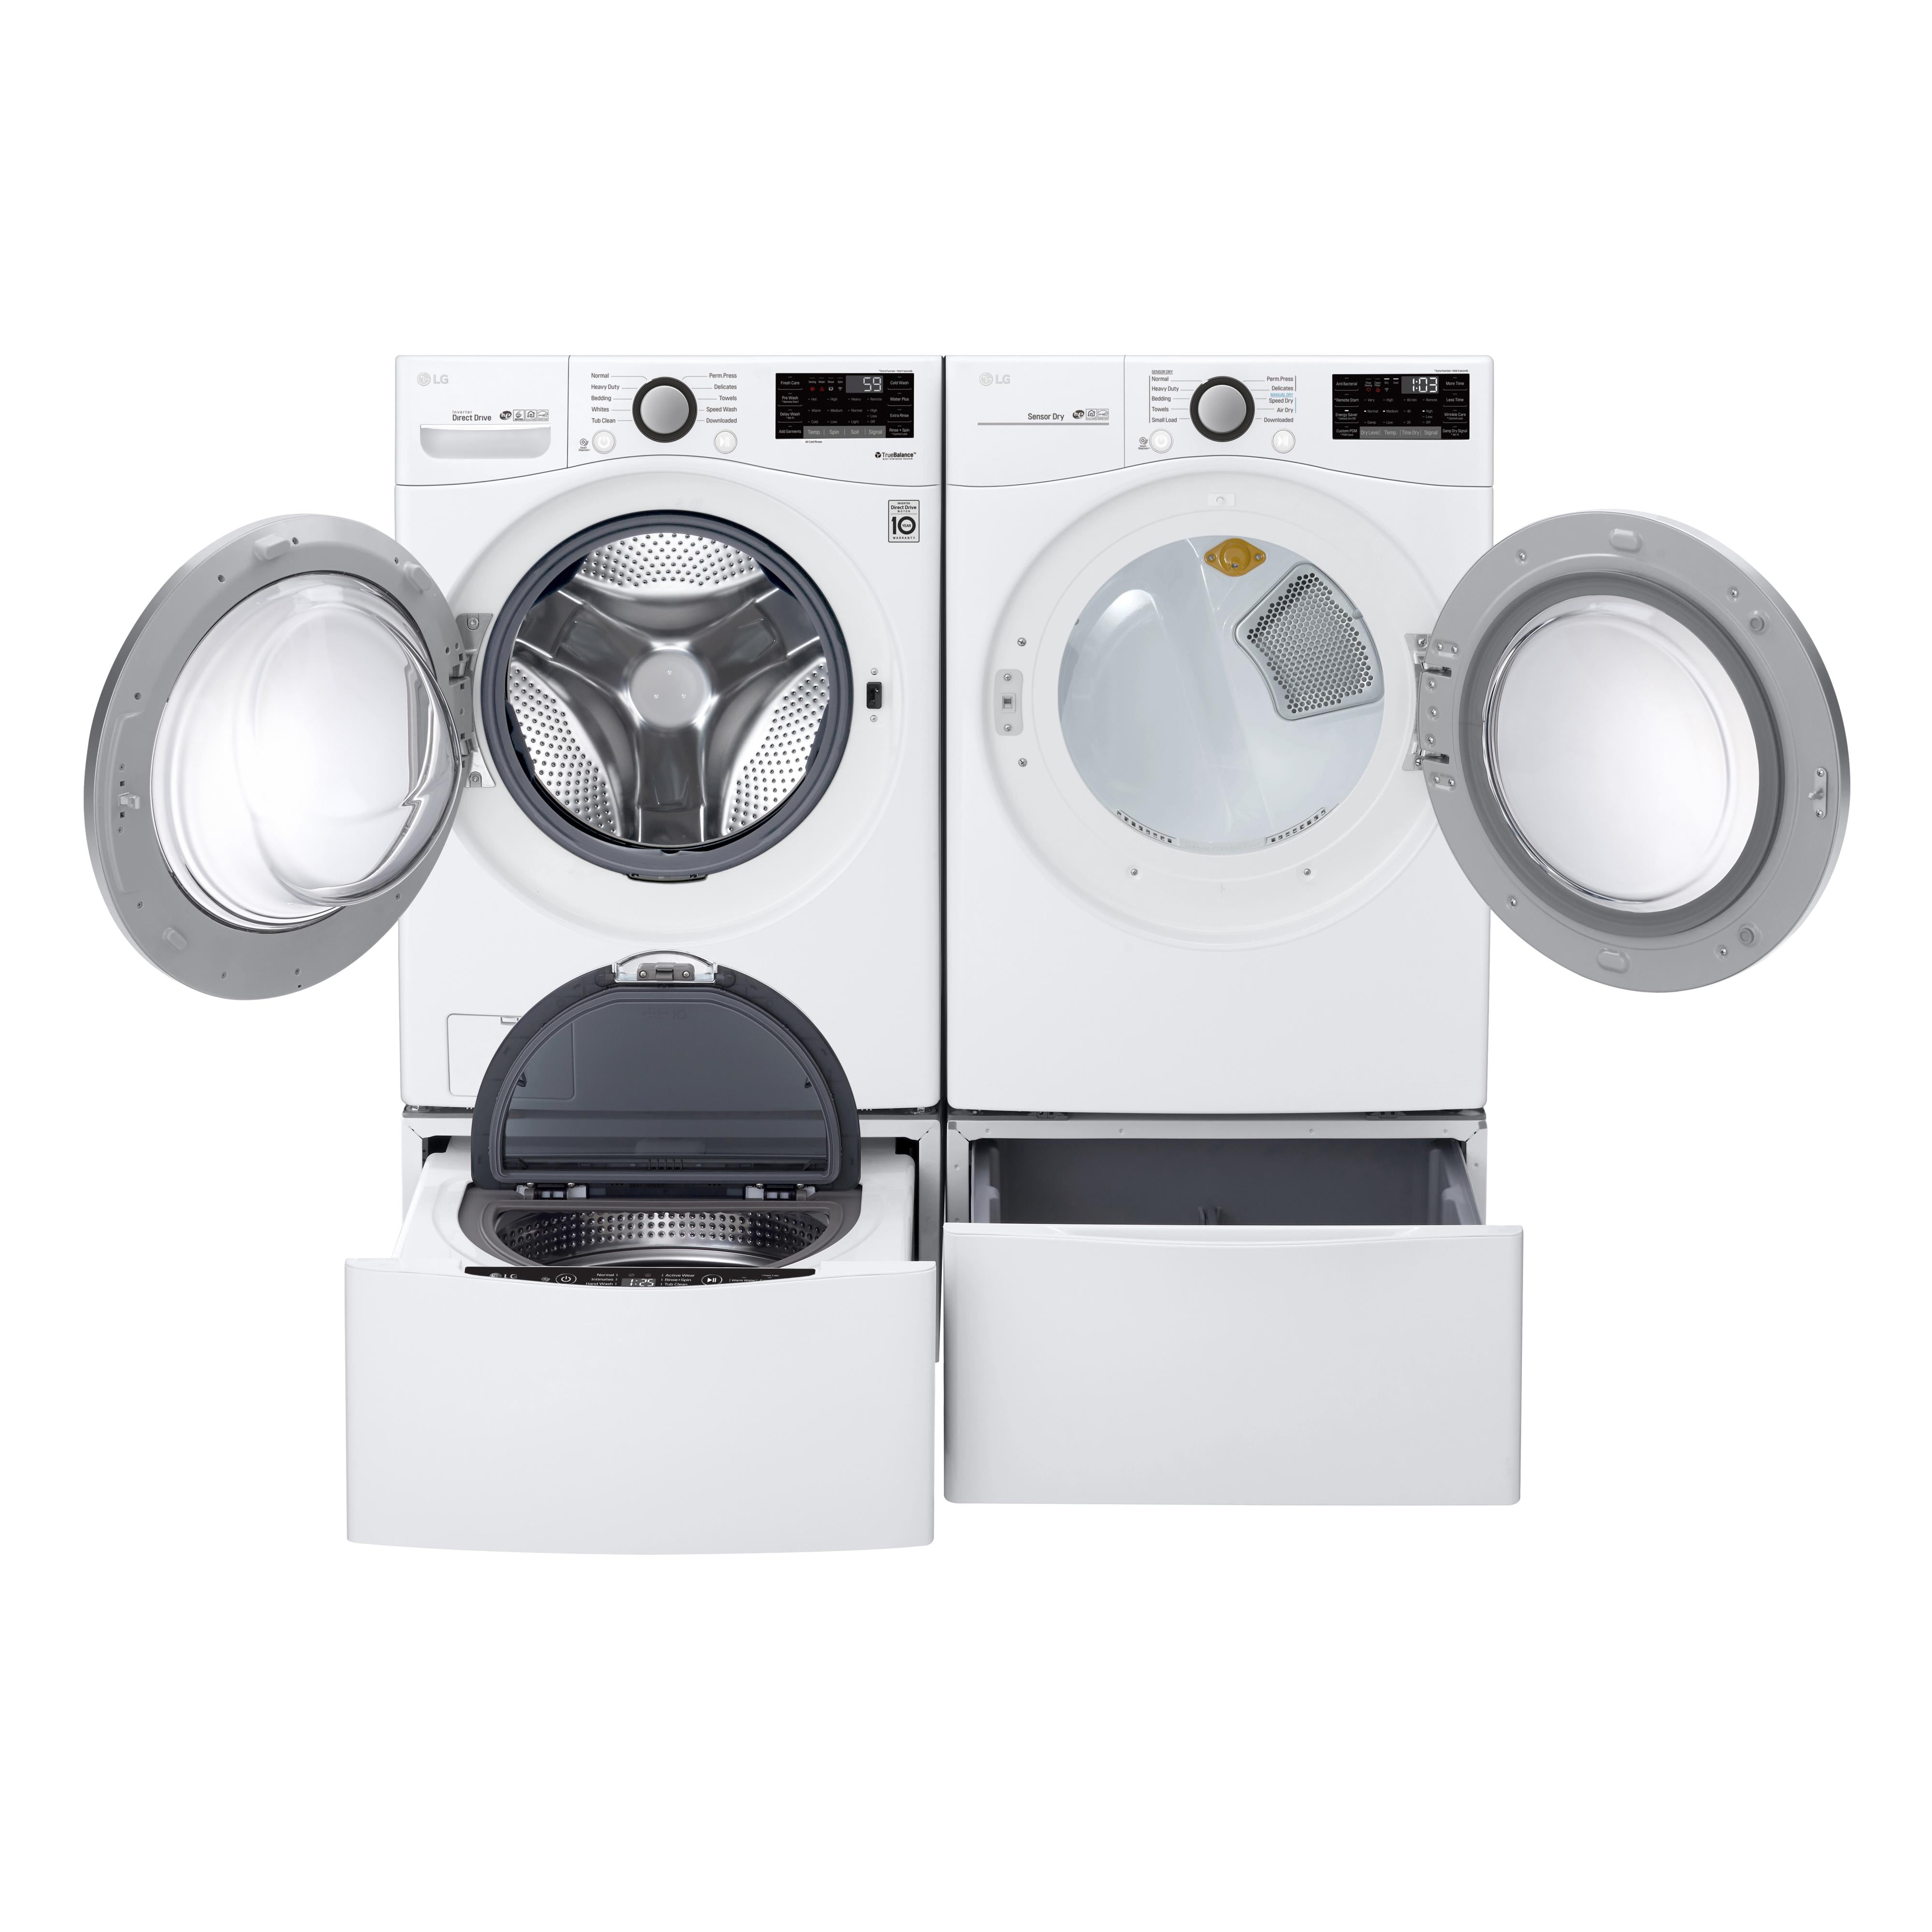 LG 4.5 cu. ft. Front Loading Washer with 6Motion? Technology WM3500CW